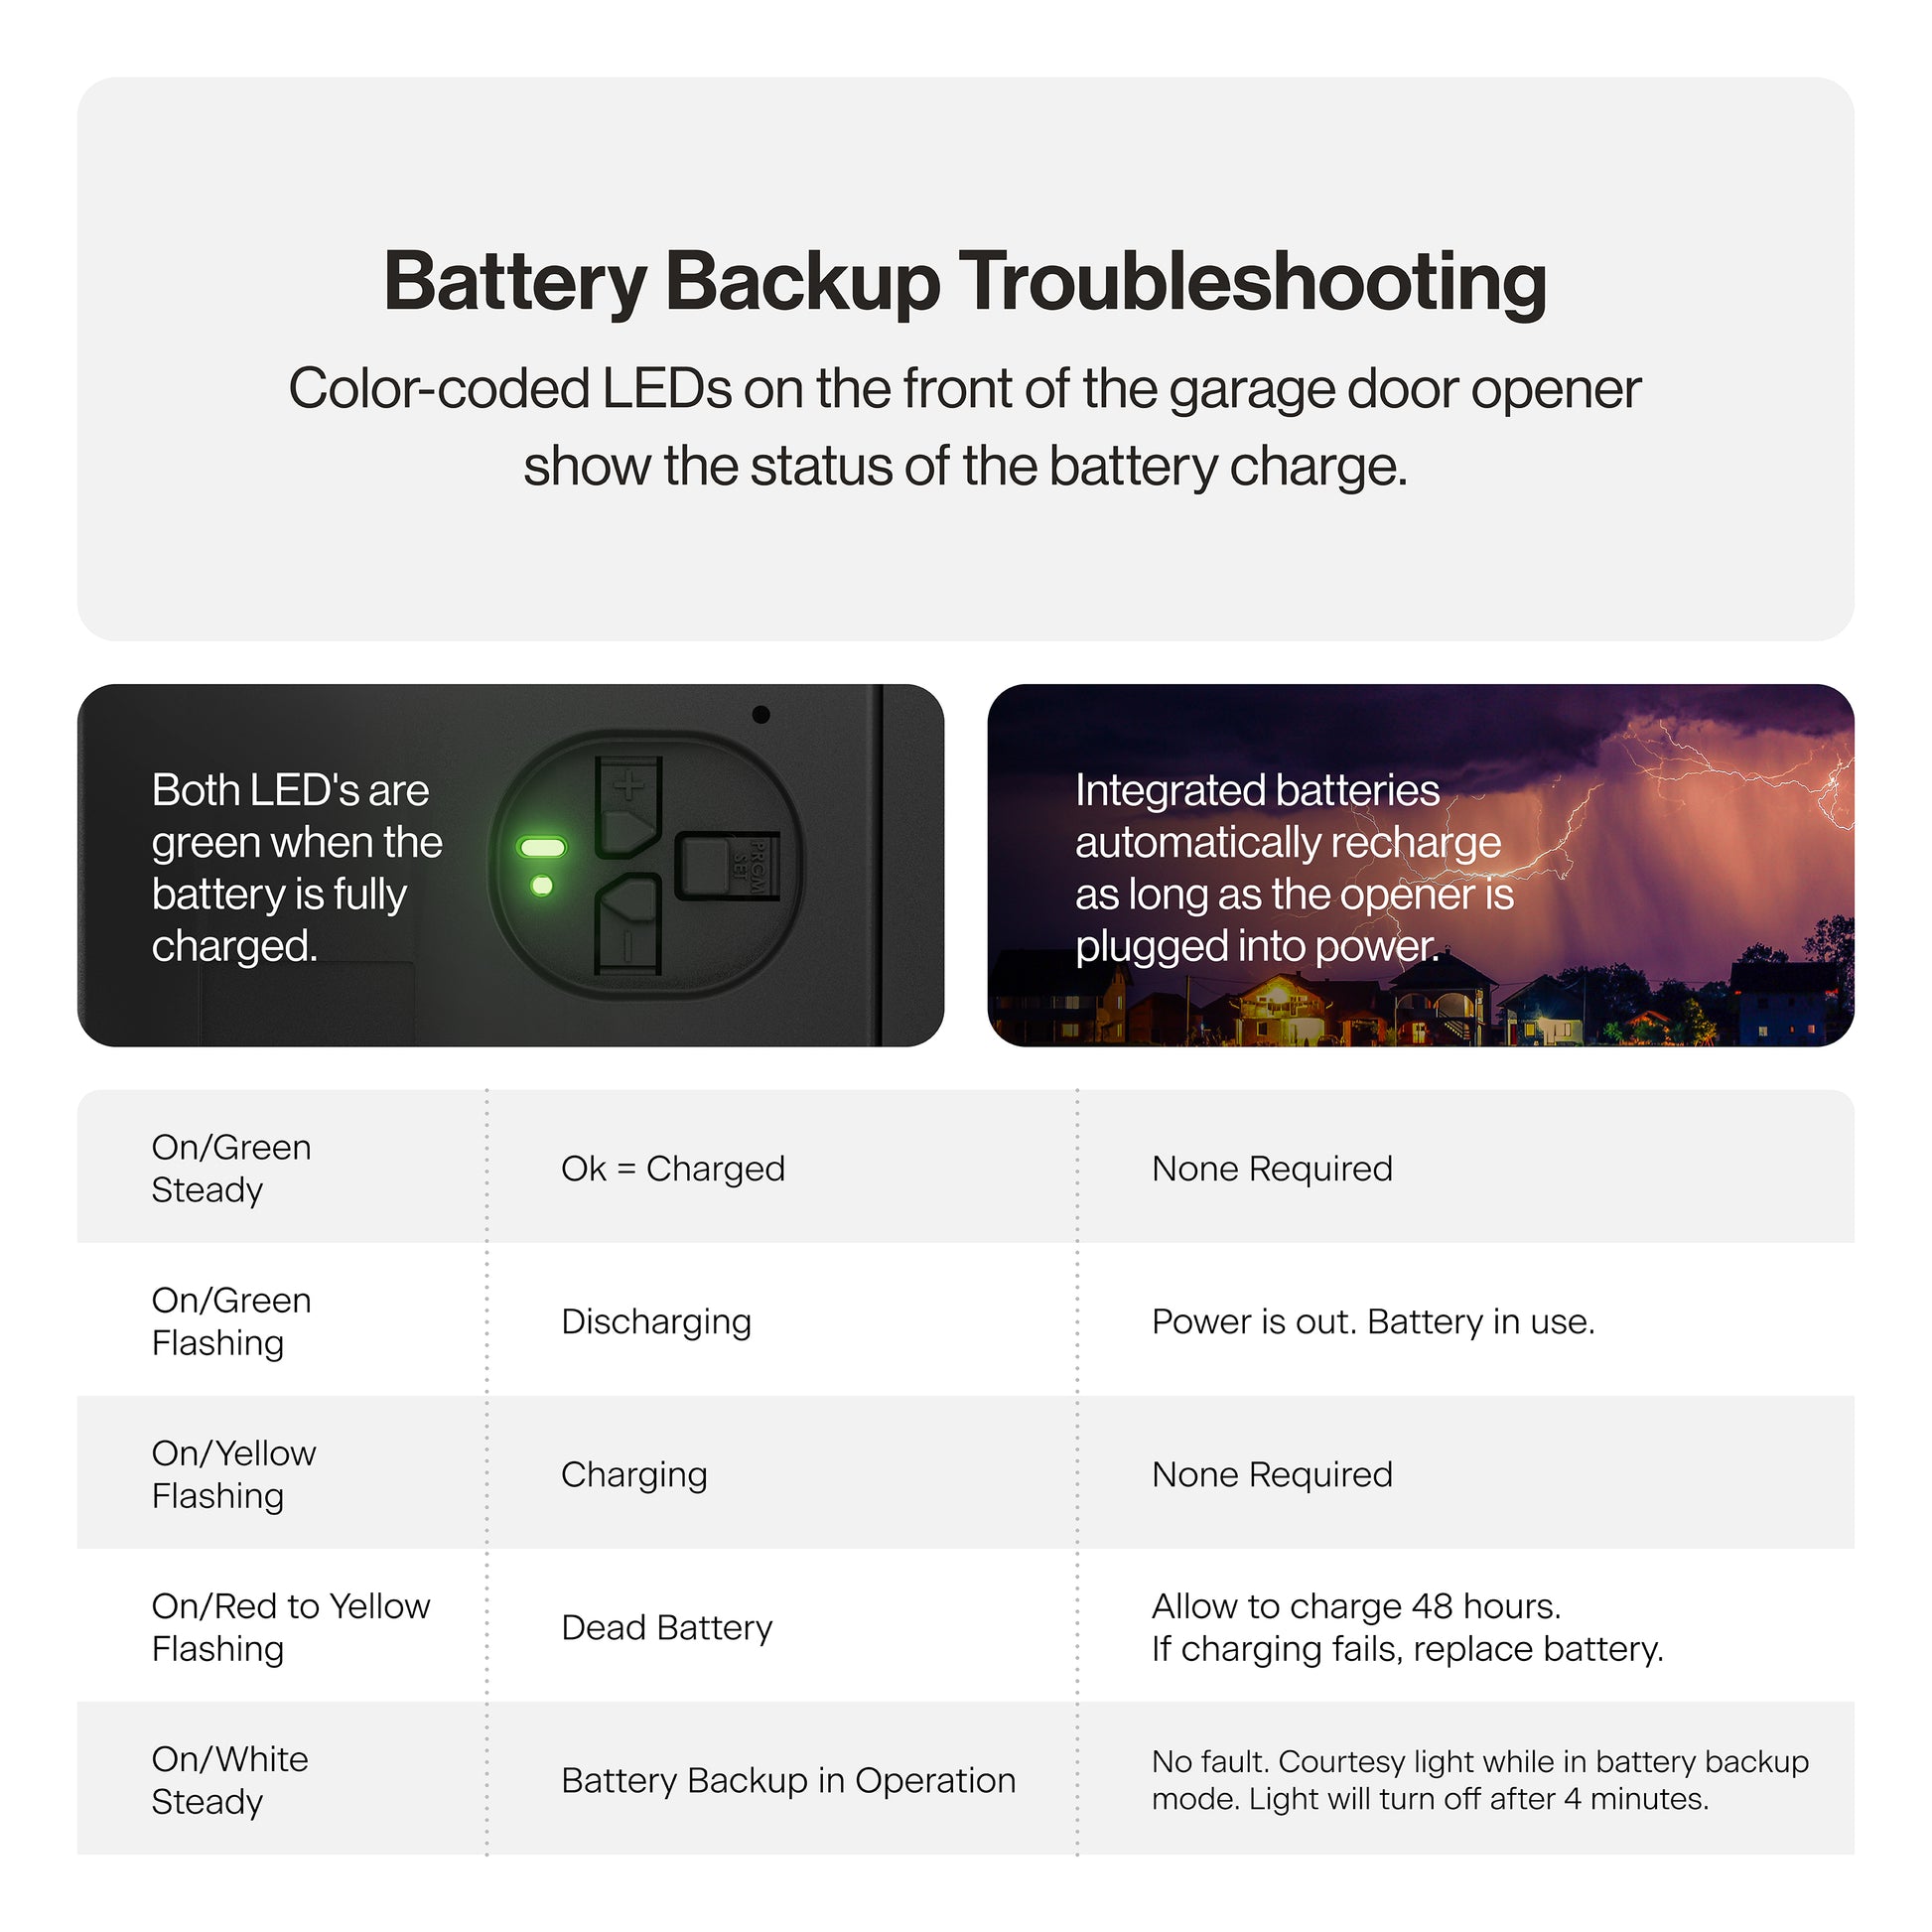 Battery backup troubleshooting_color-coded LEDs on the garage door opener